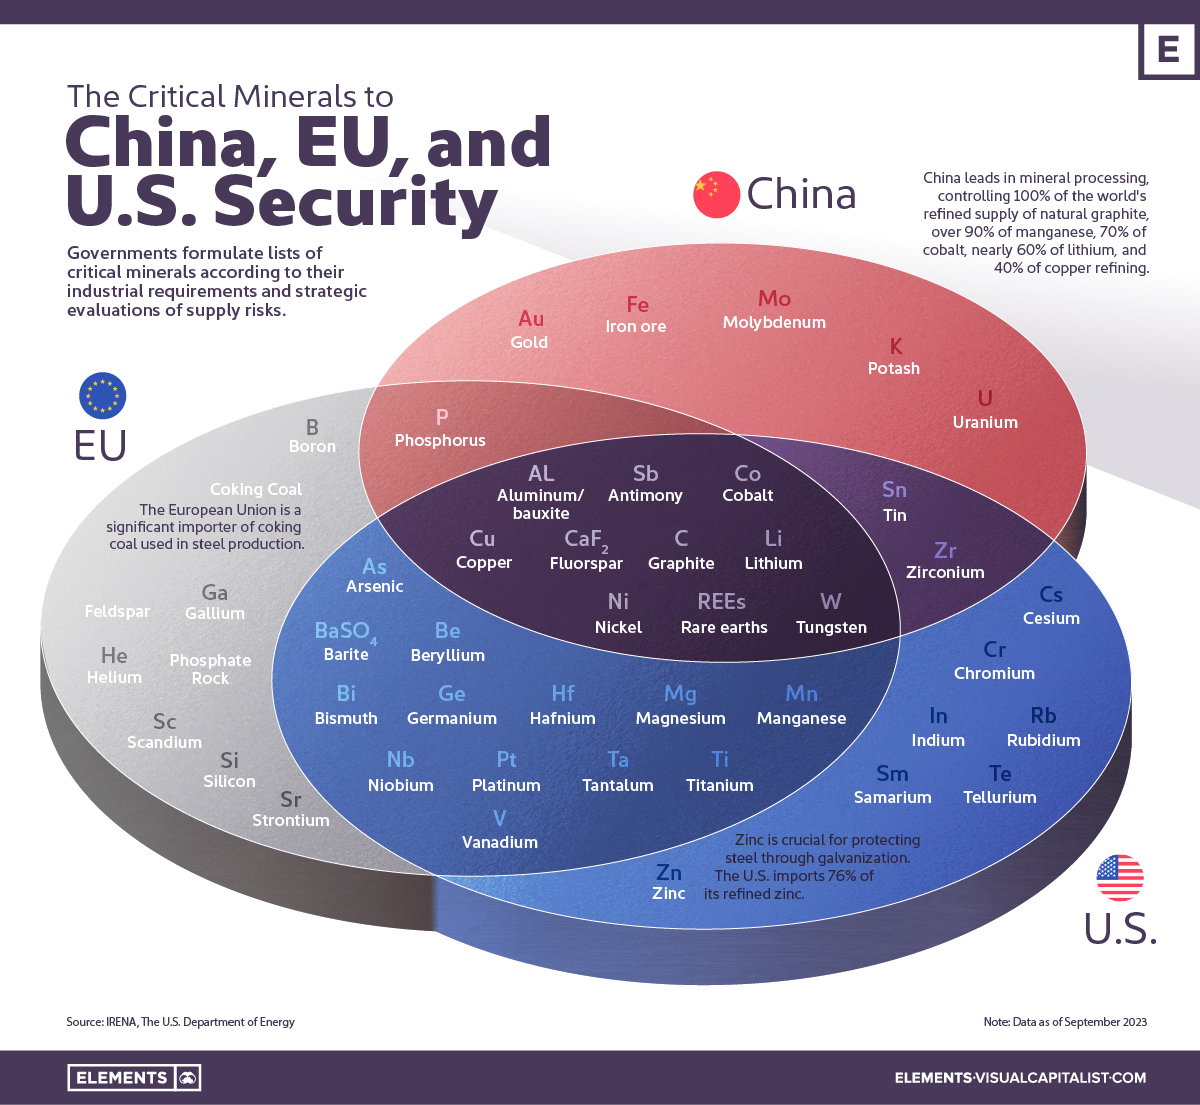 The Critical Minerals to China, EU, and U.S. National Security